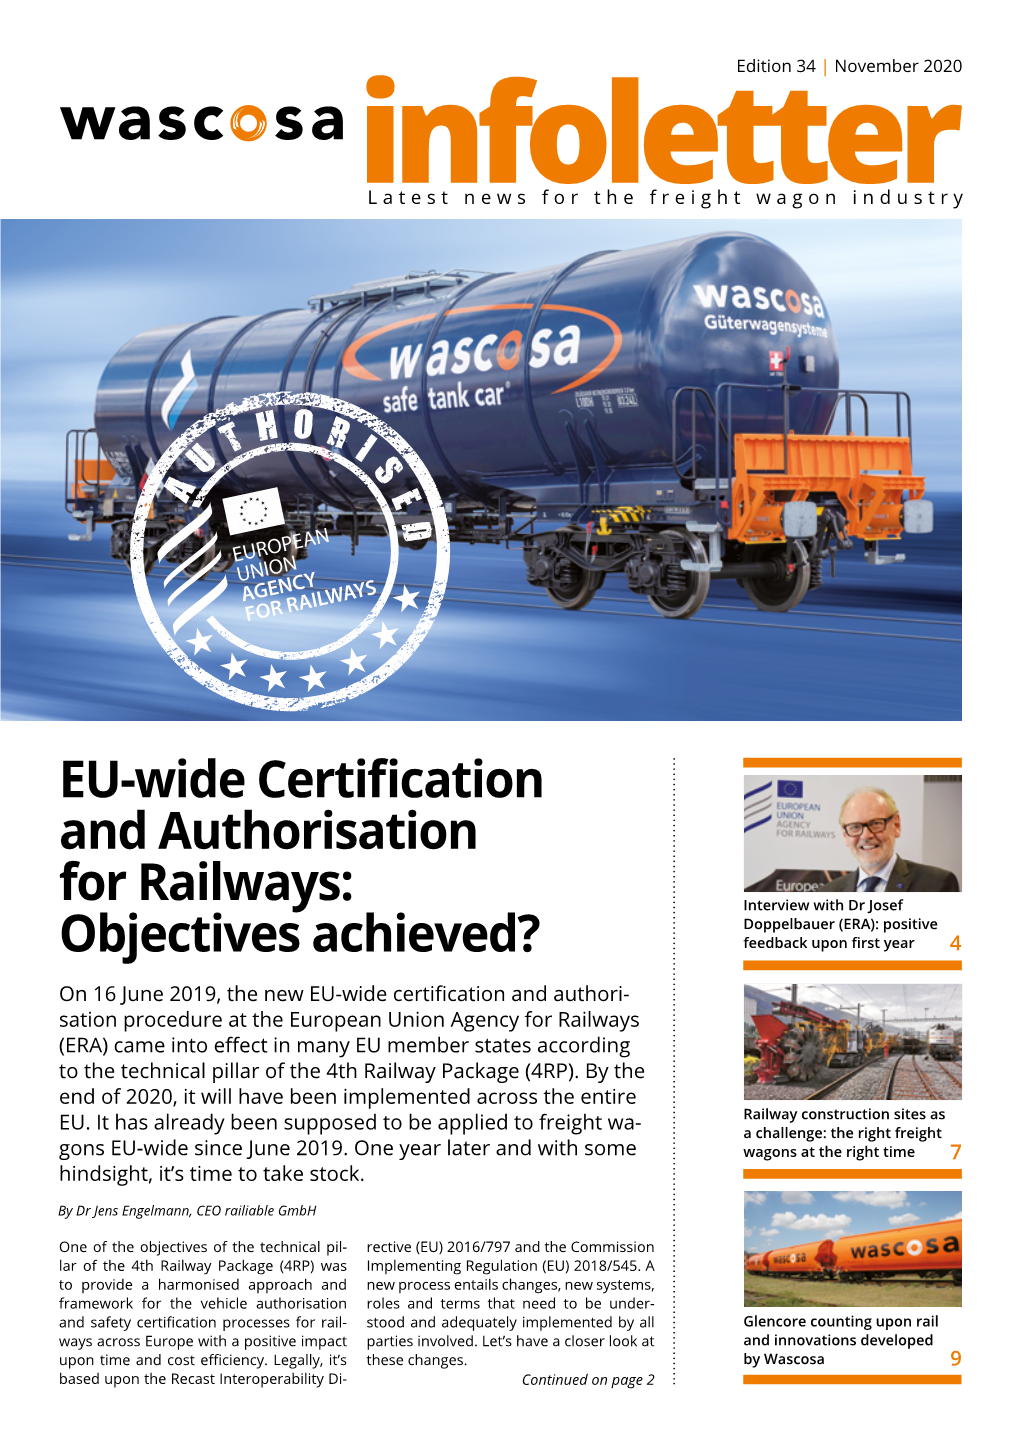 EU-Wide Certification and Authorisation for Railways